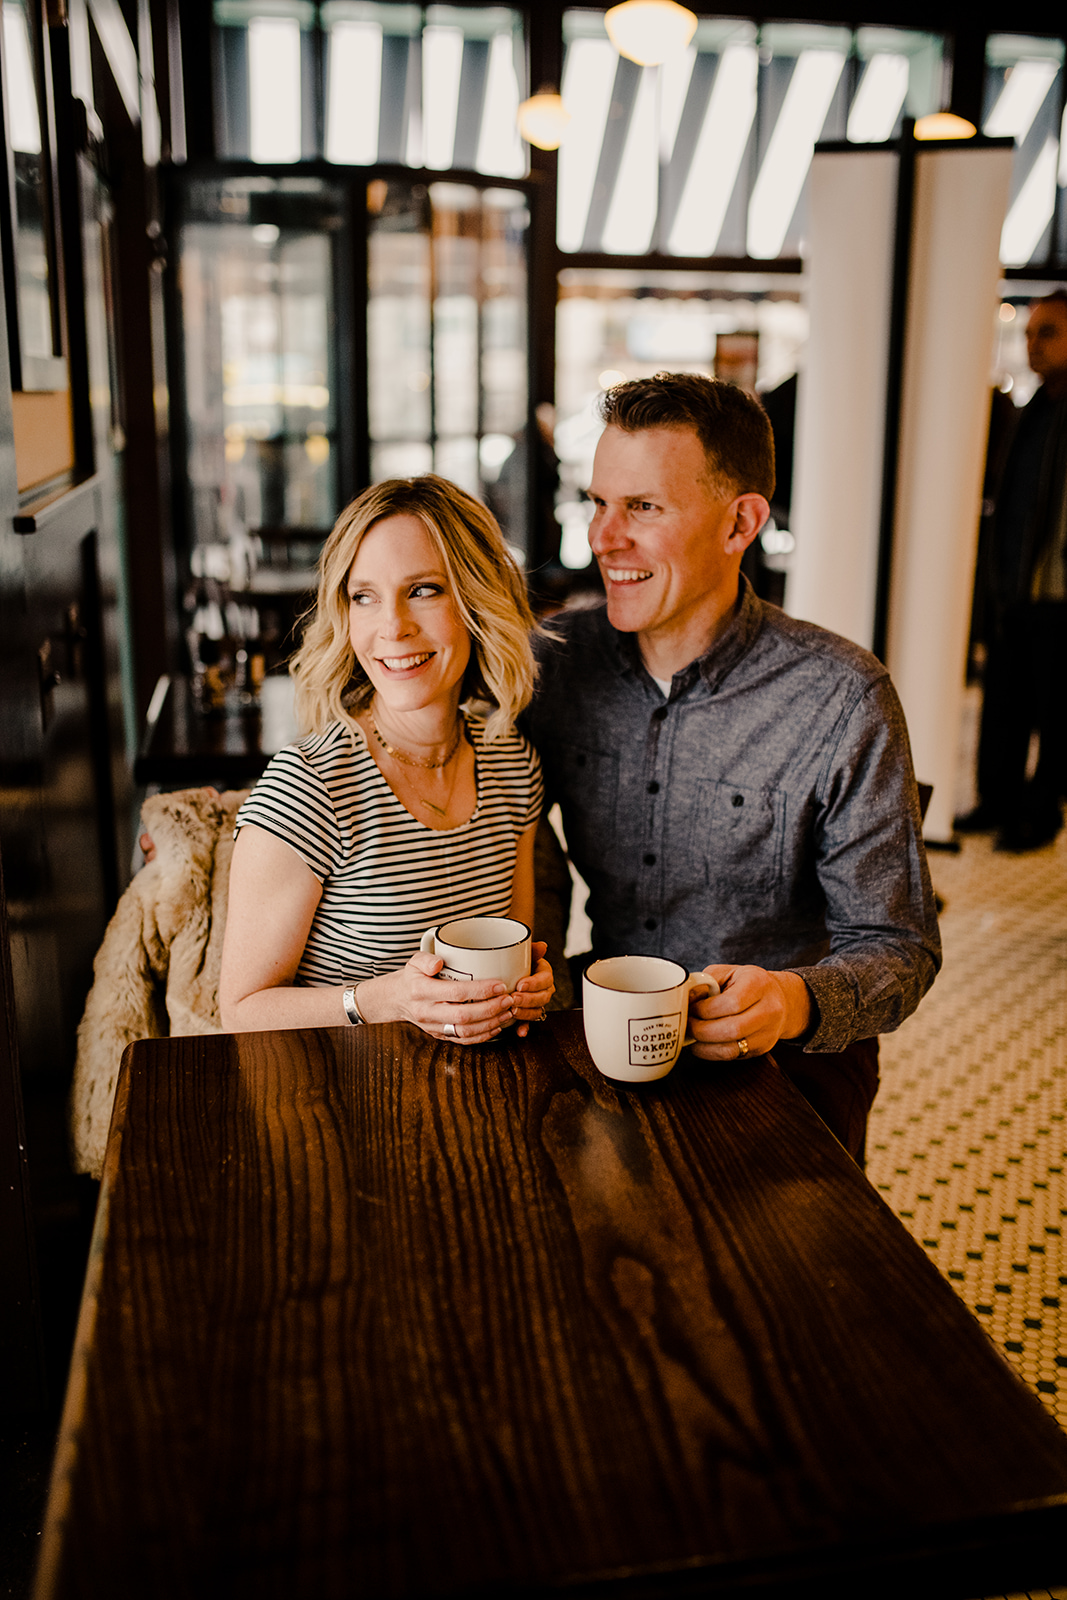 Chicago engagement photography with a focus on authenticity
